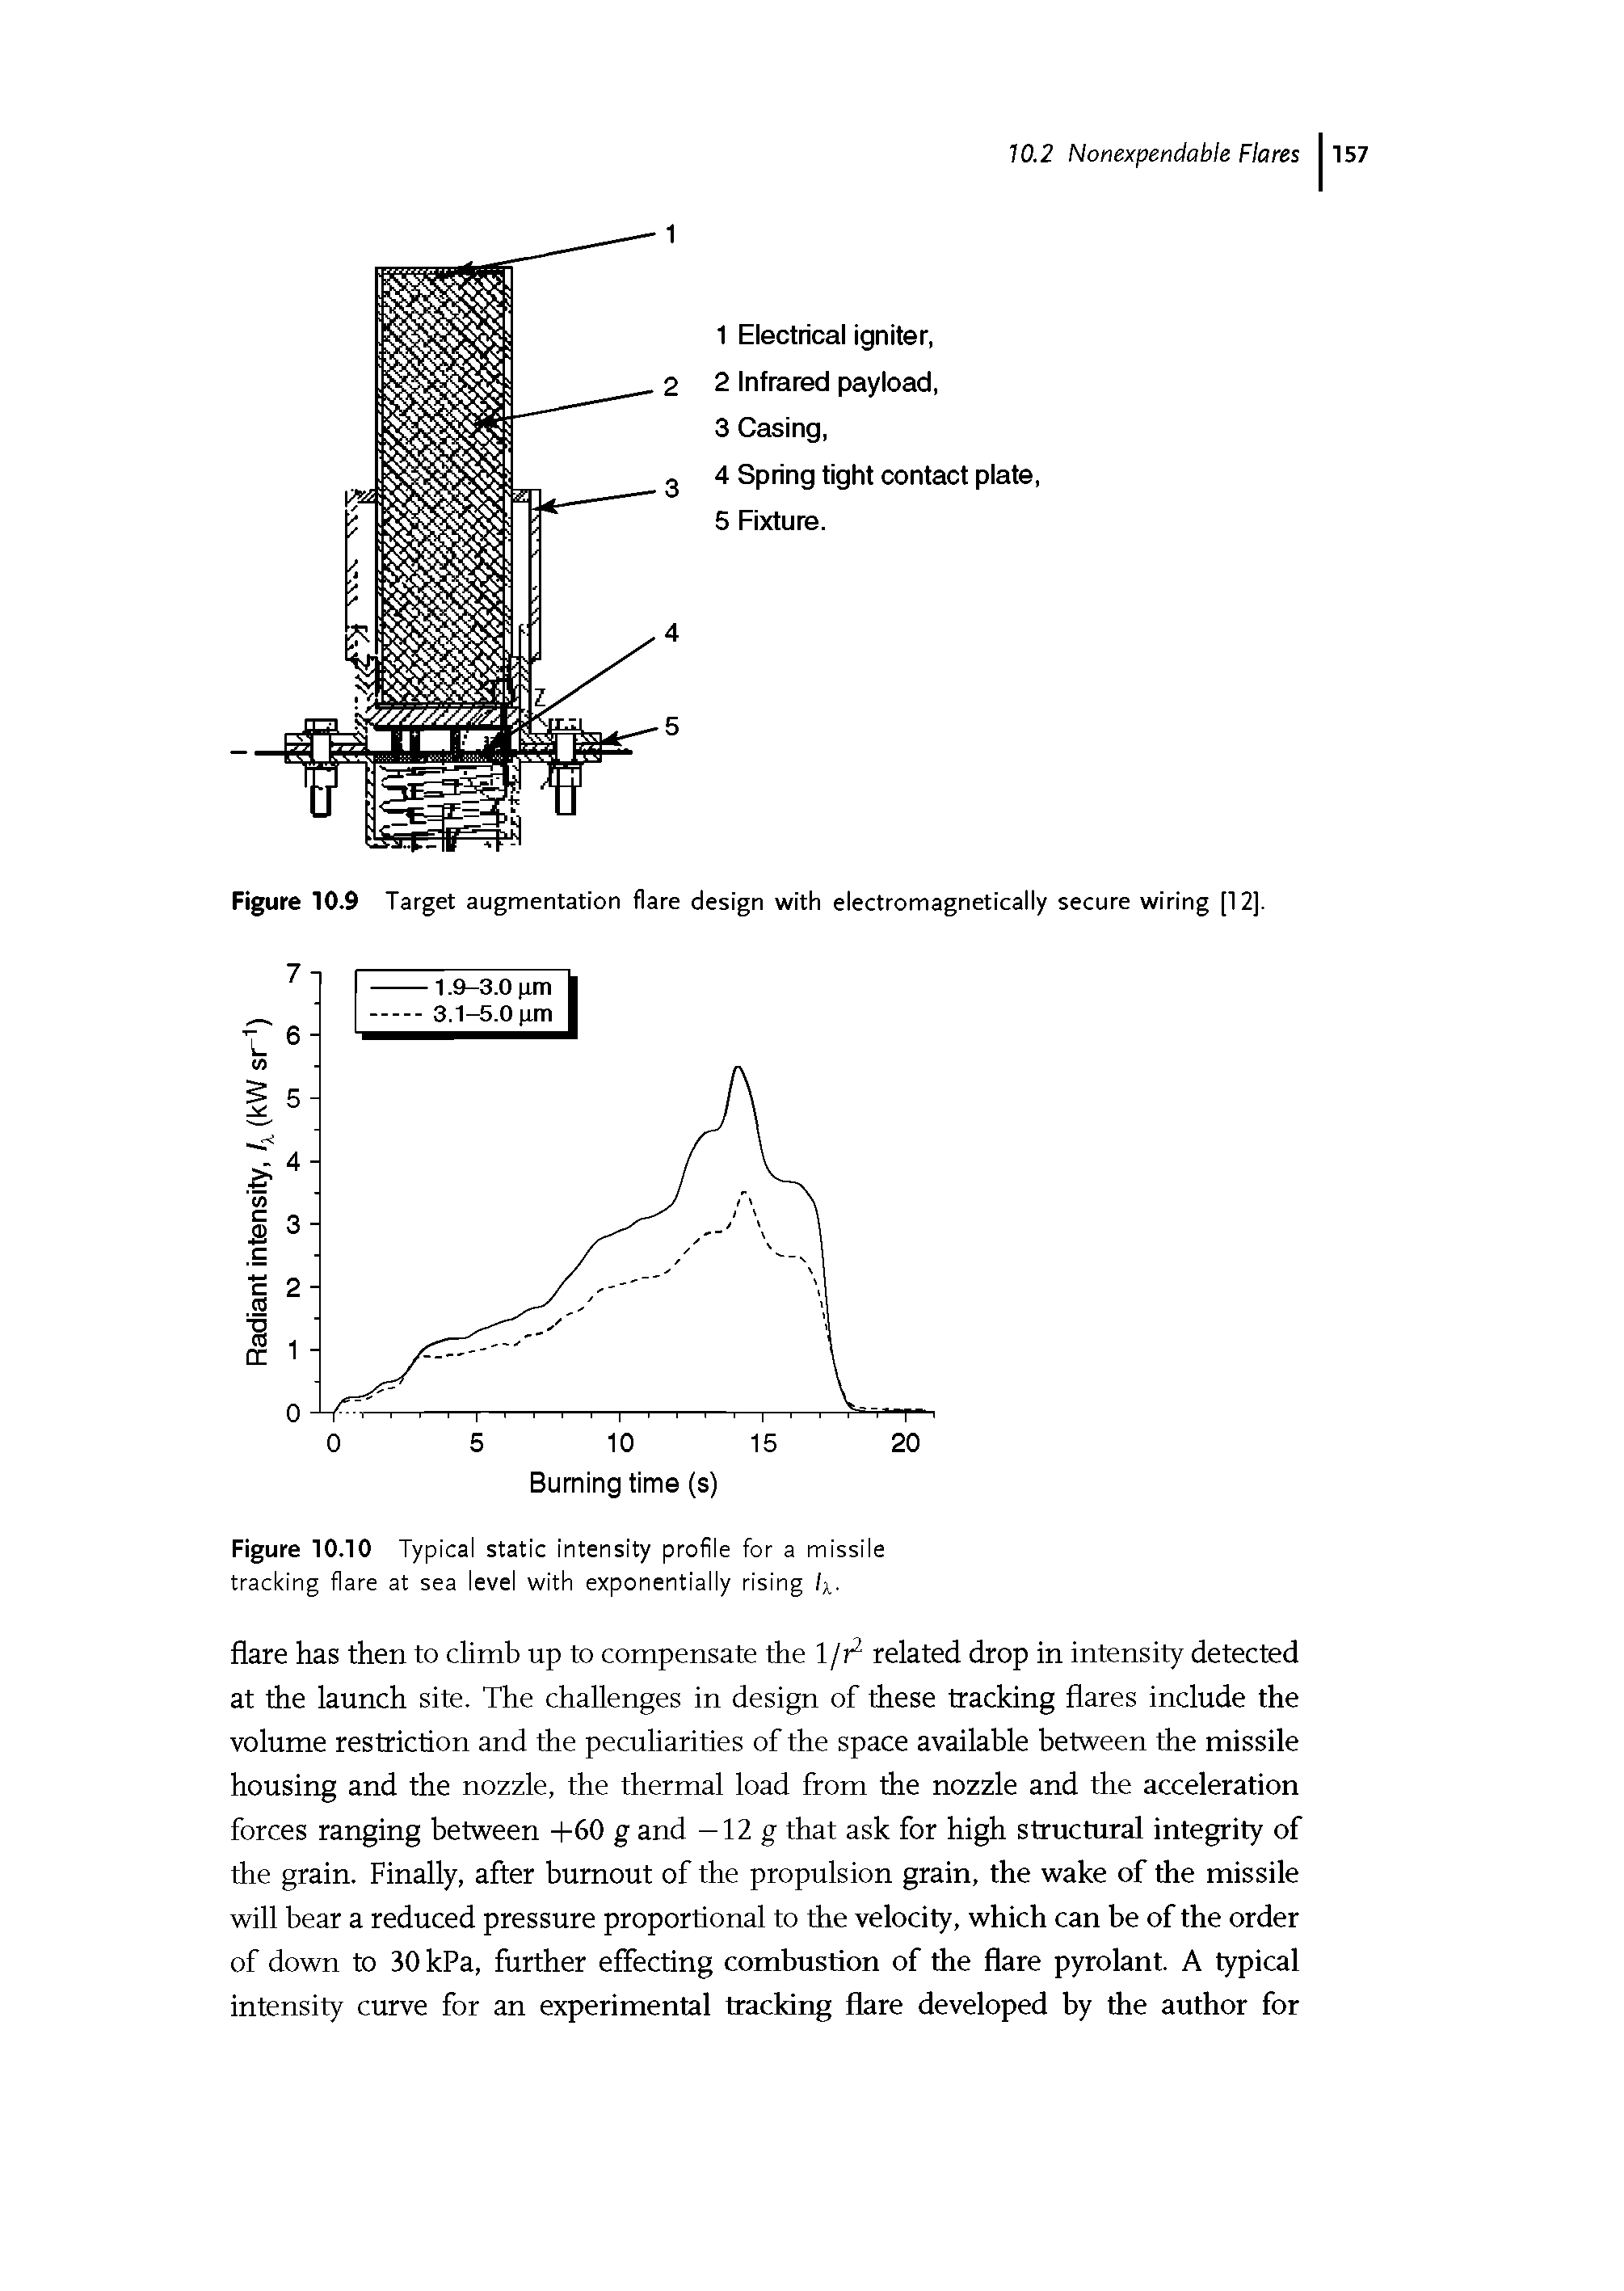 Figure 10.10 Typical static intensity profile for a missile tracking flare at sea level with exponentially rising /x.